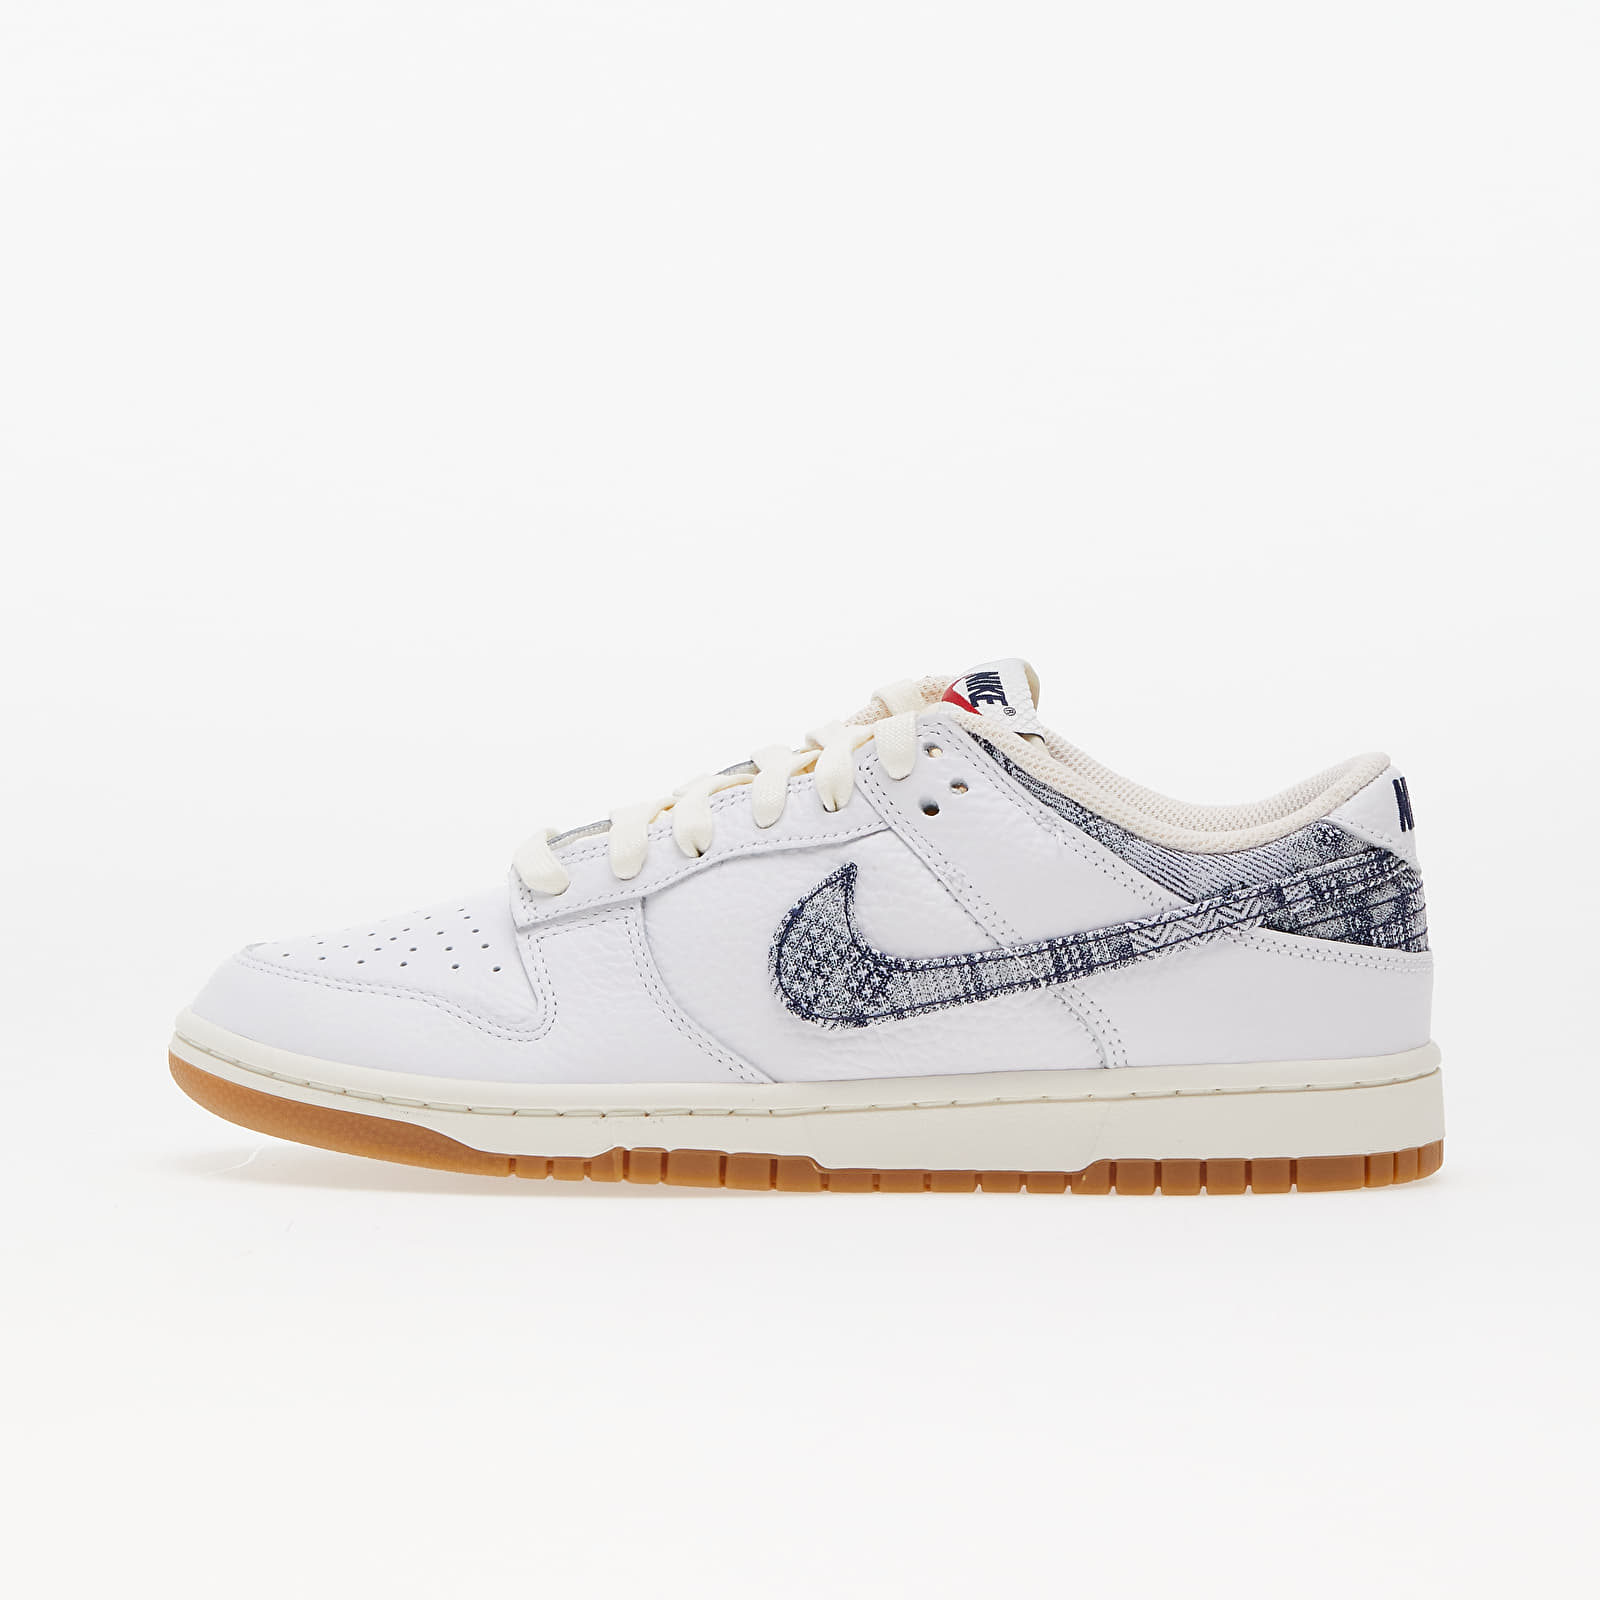 Nike - dunk low white/ midnight navy-gym red-sail